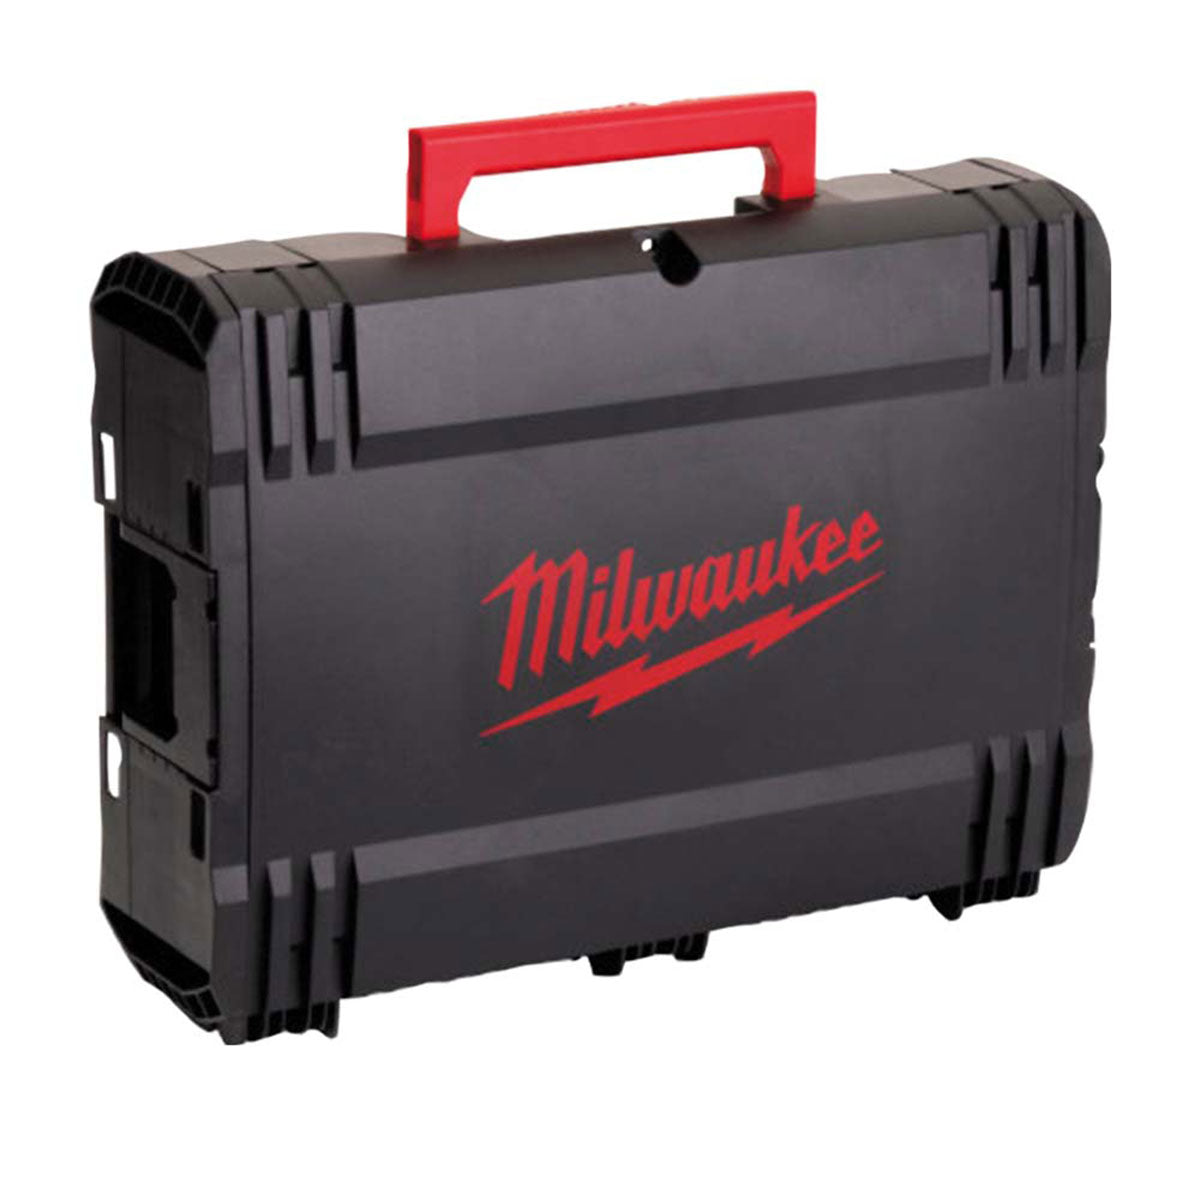 Milwaukee 18V M18 ONEFHPX-0X Fuel Brushless SDS Plus Hammer Drill Body with Case 4933478495